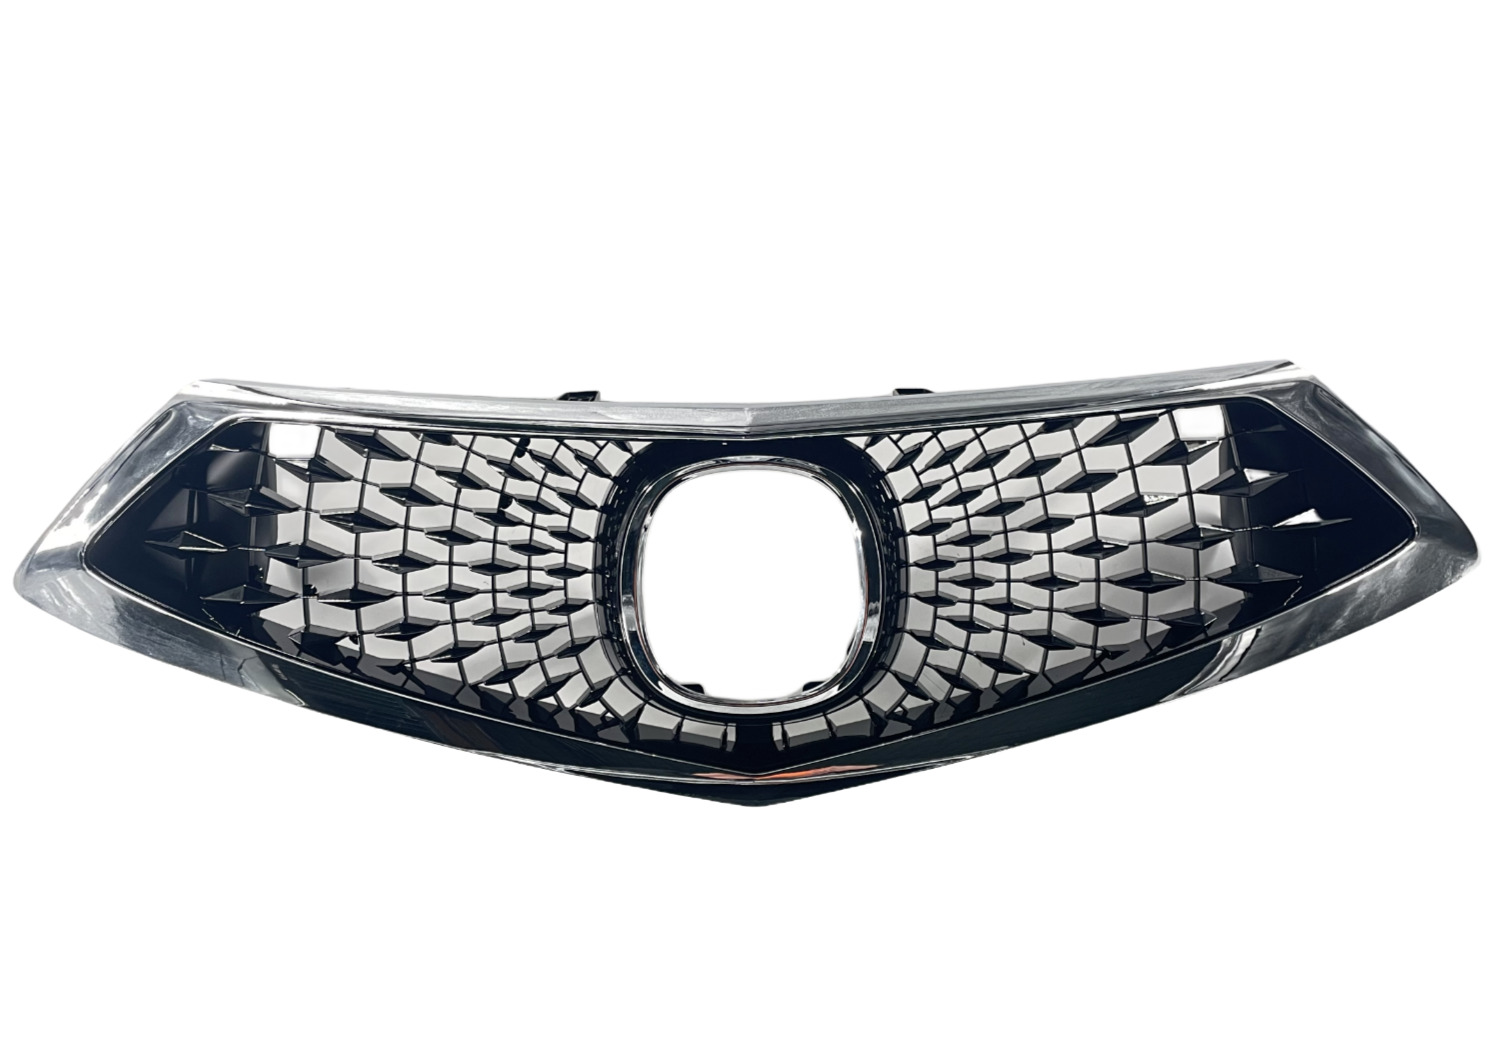 ⭐⭐ FOR 2019 - 2021 ACURA RDX FRONT BUMPER UPPER GRILLE W/ CHROME MOLDING ⭐⭐